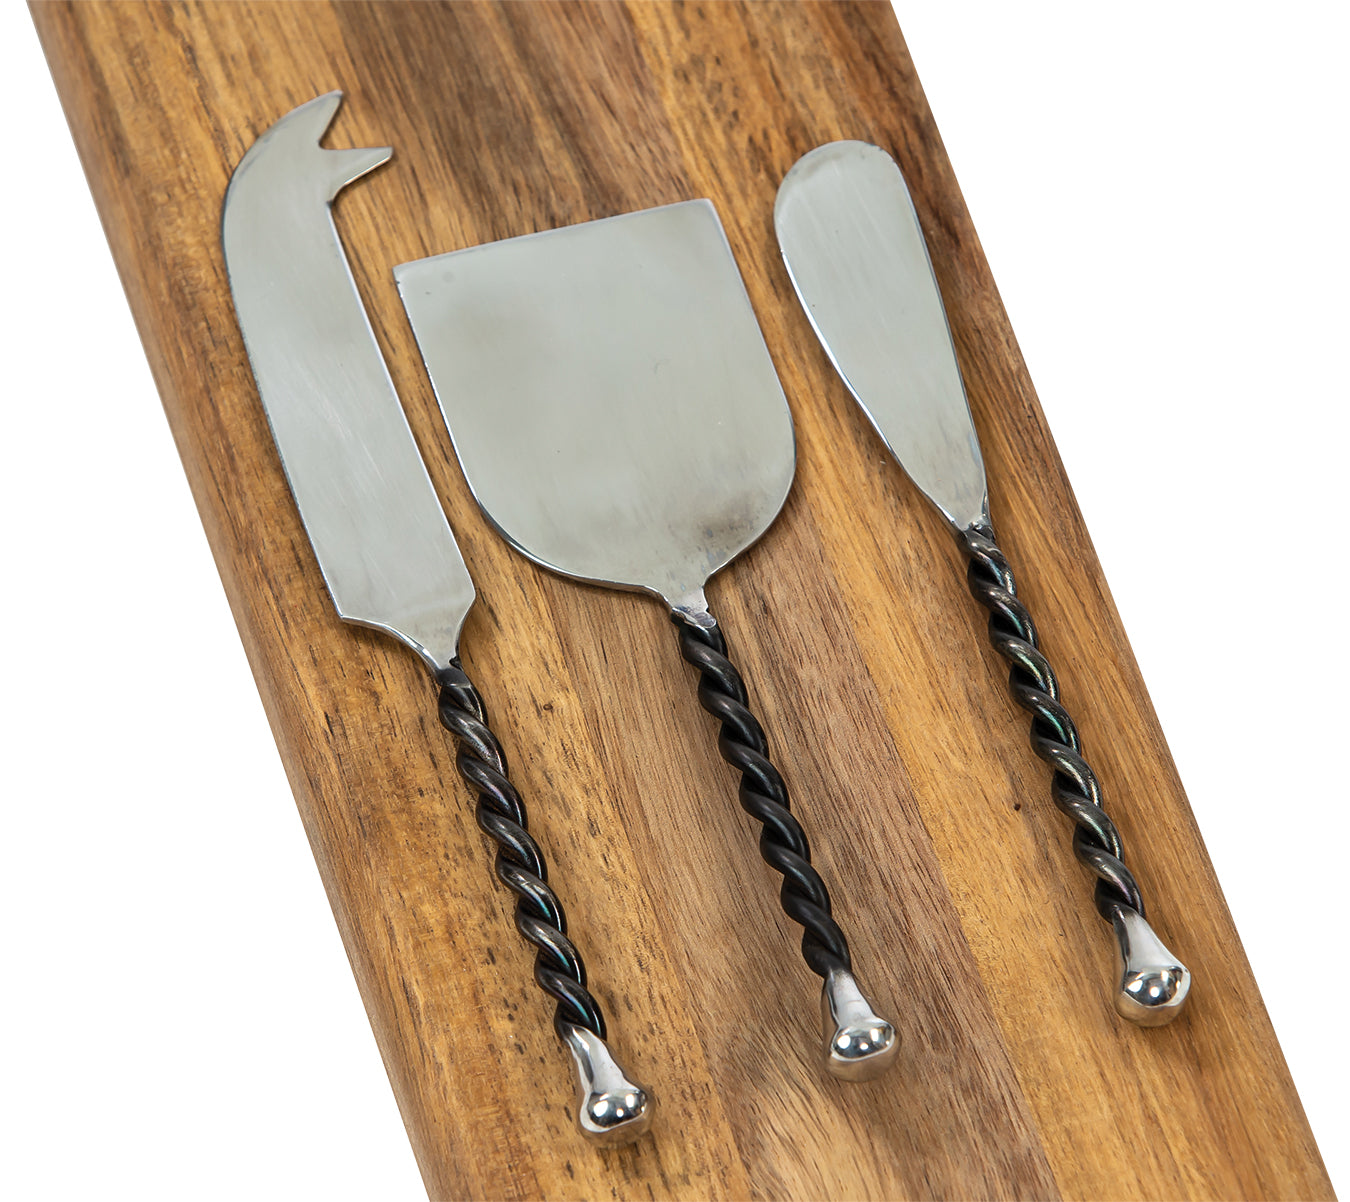 Oak & Olive - Picnic Plus Set of 3 Hand Forged Artisan Cheese Tools - Stainless Steel available at The Good Life Boutique